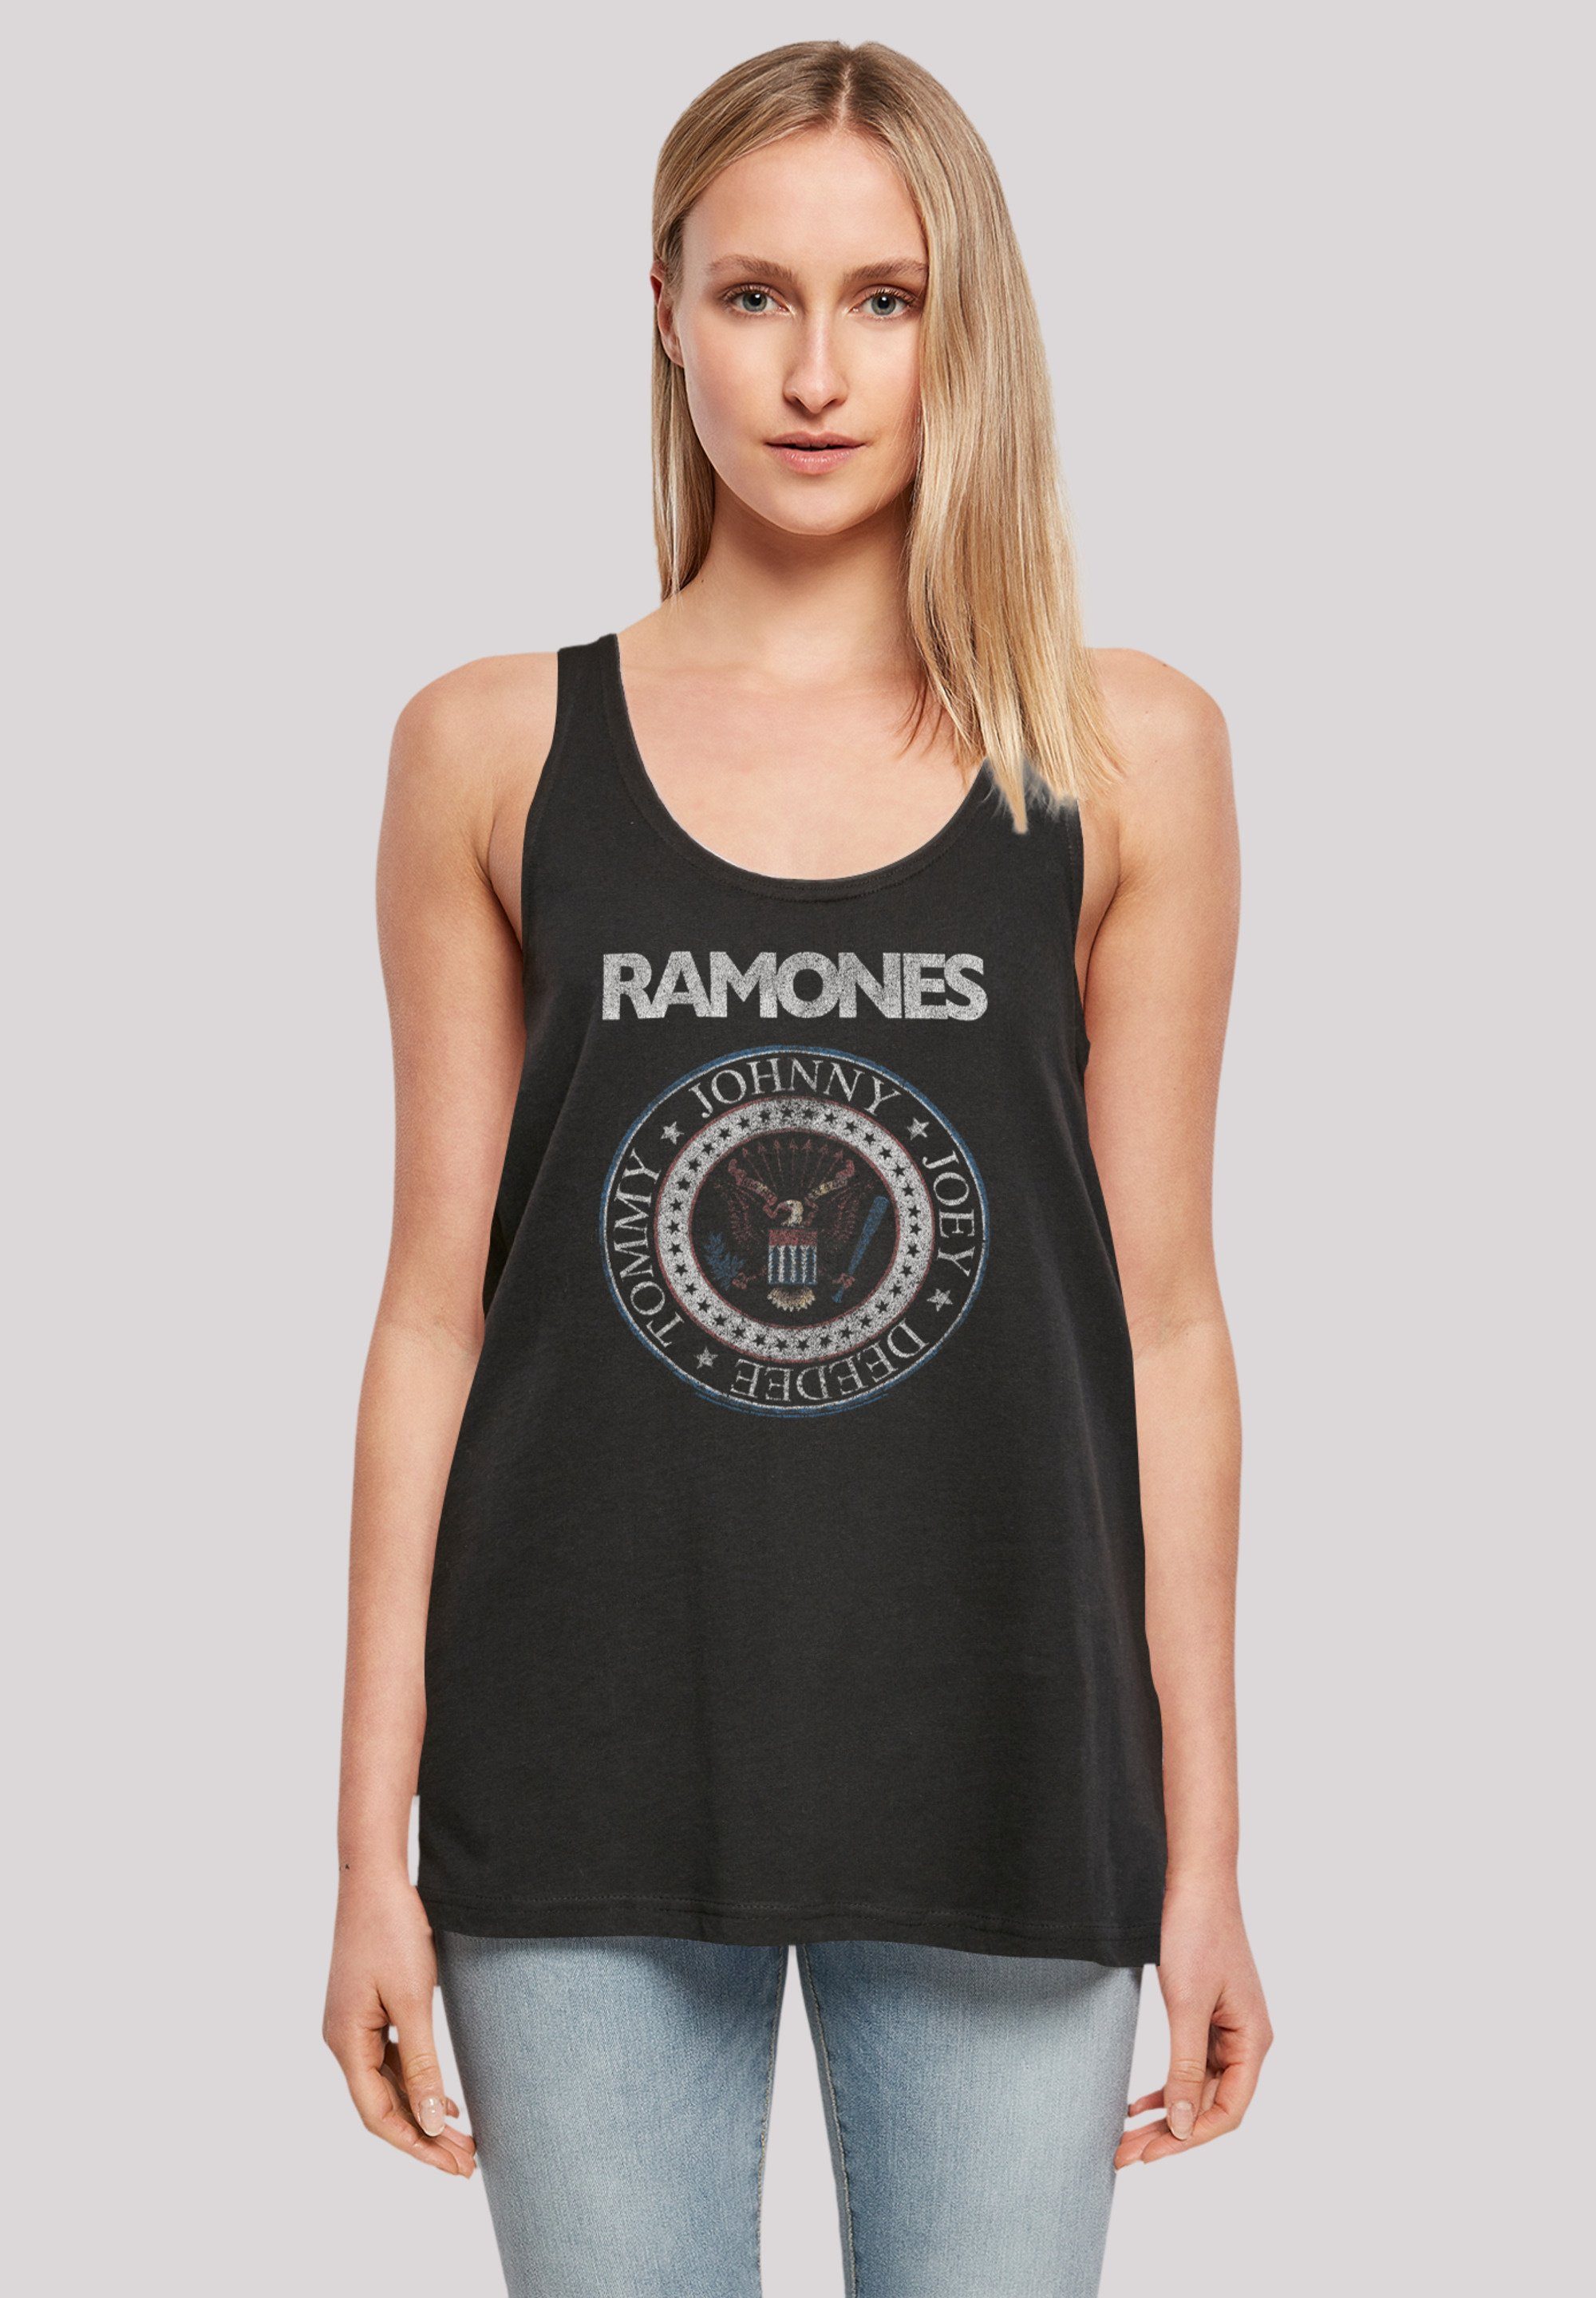 Band Ramones Qualität, F4NT4STIC T-Shirt Red Rock-Musik And White Band, Seal Rock Musik Premium